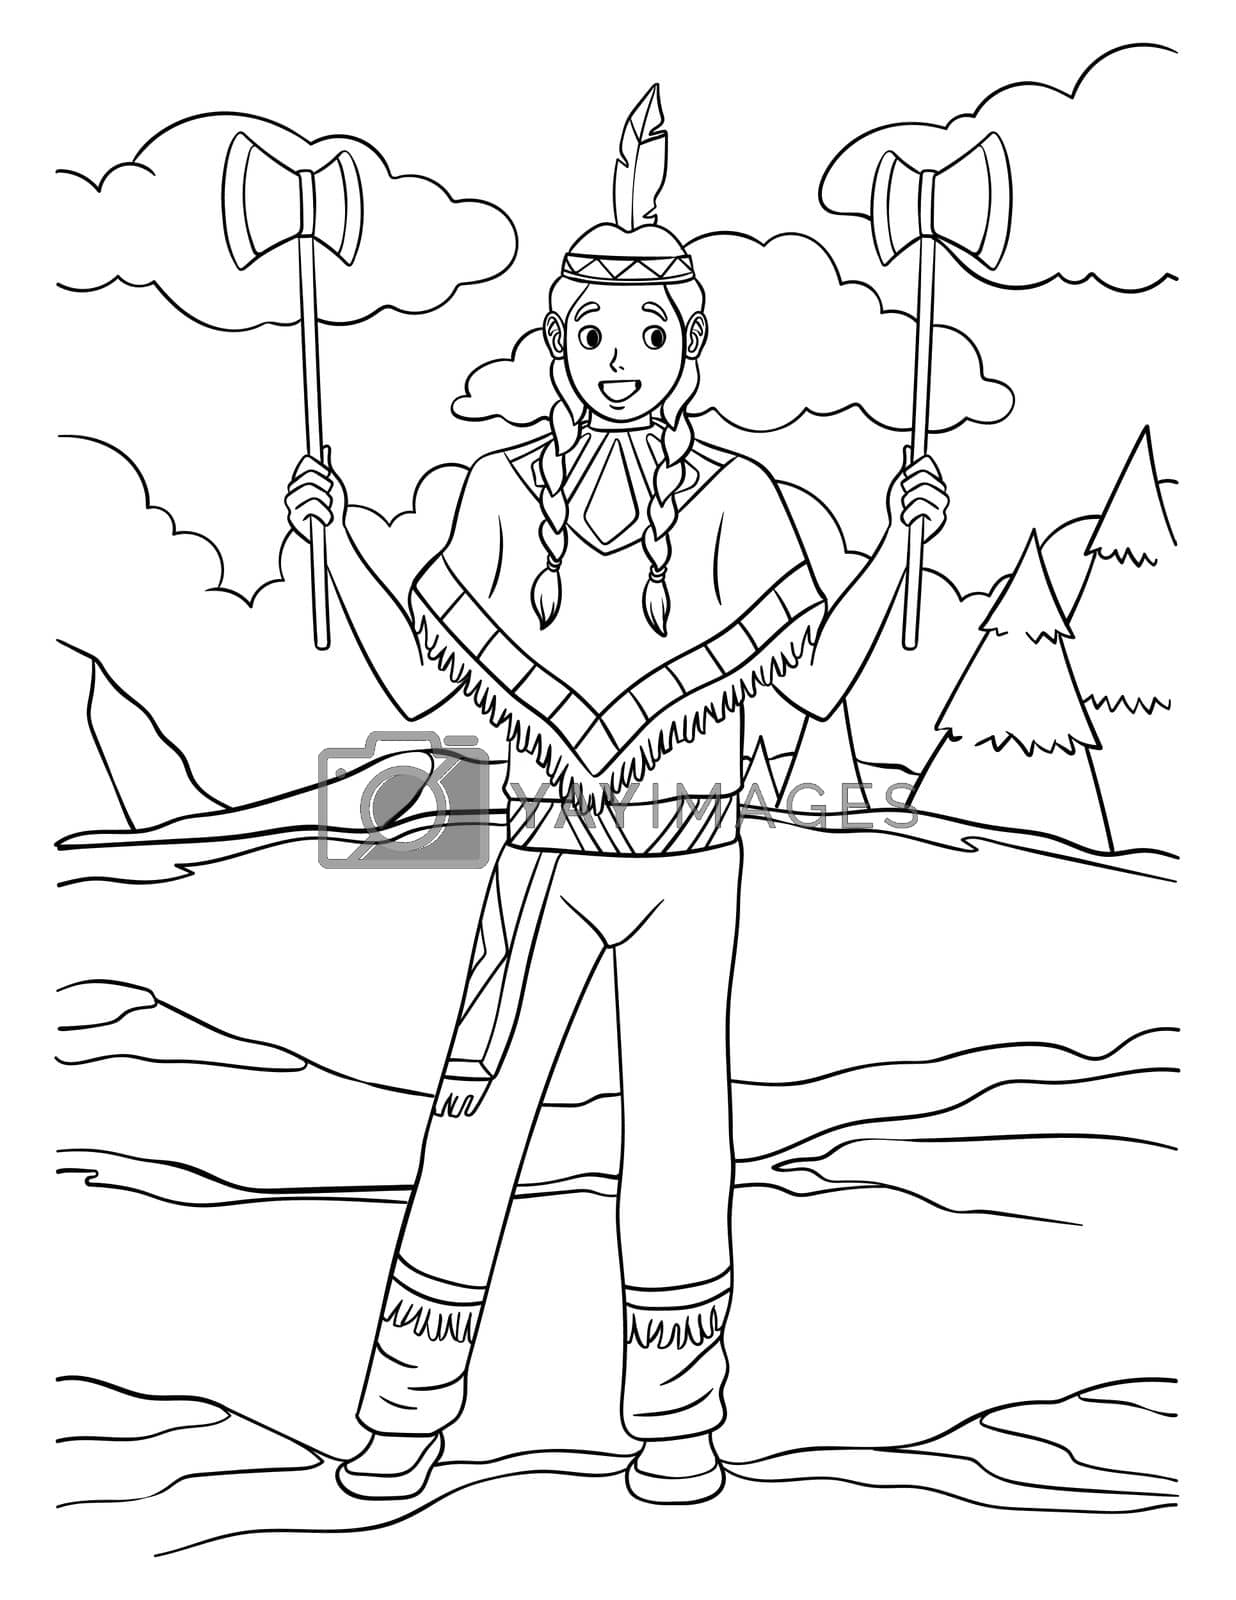 Royalty free image of Native American Indian With Tomahawk Coloring Page by abbydesign